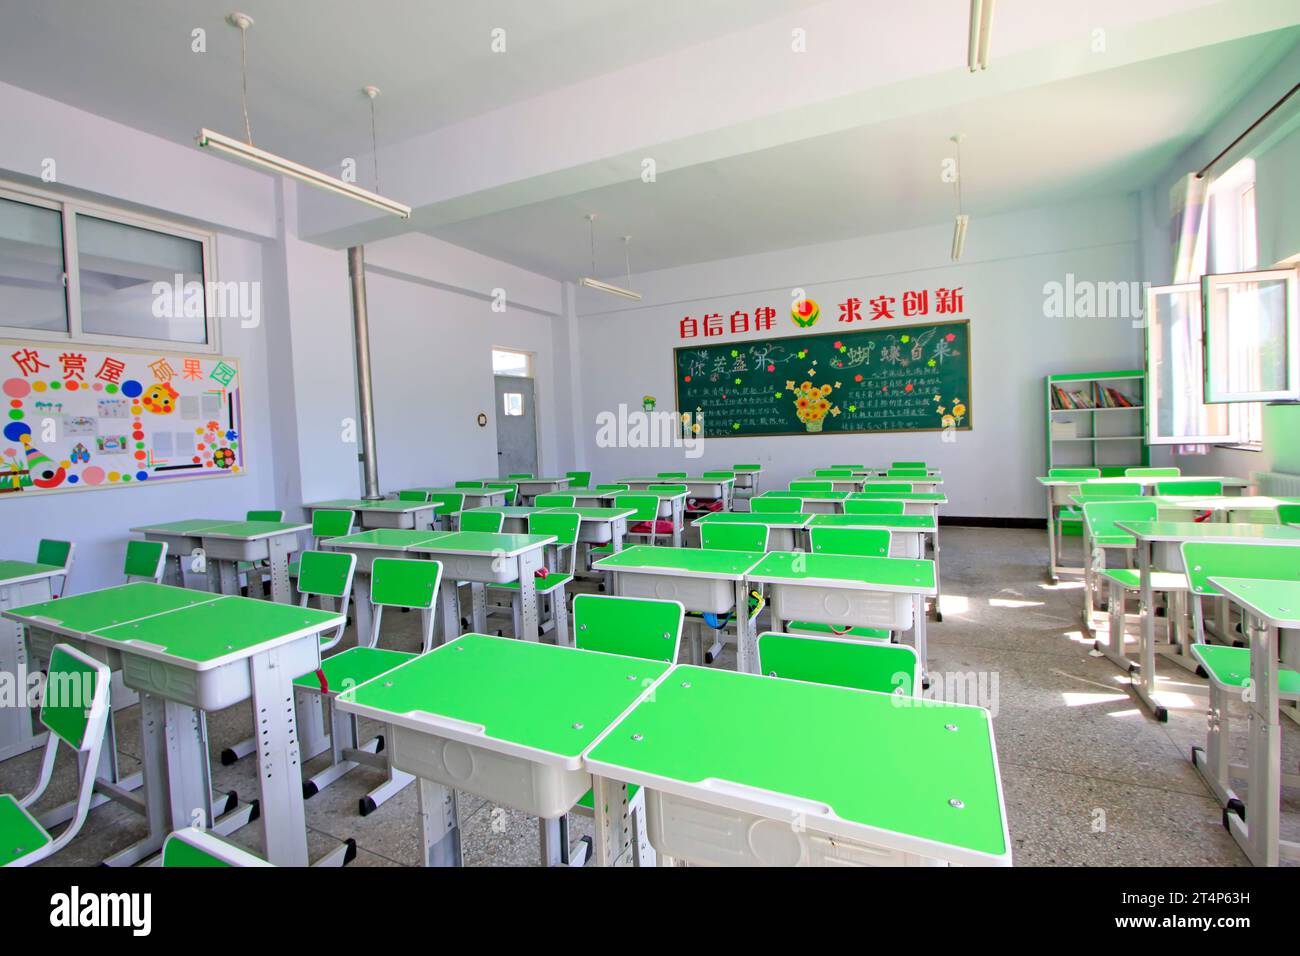 Desks and chairs in the primary school classroom, China Stock Photo